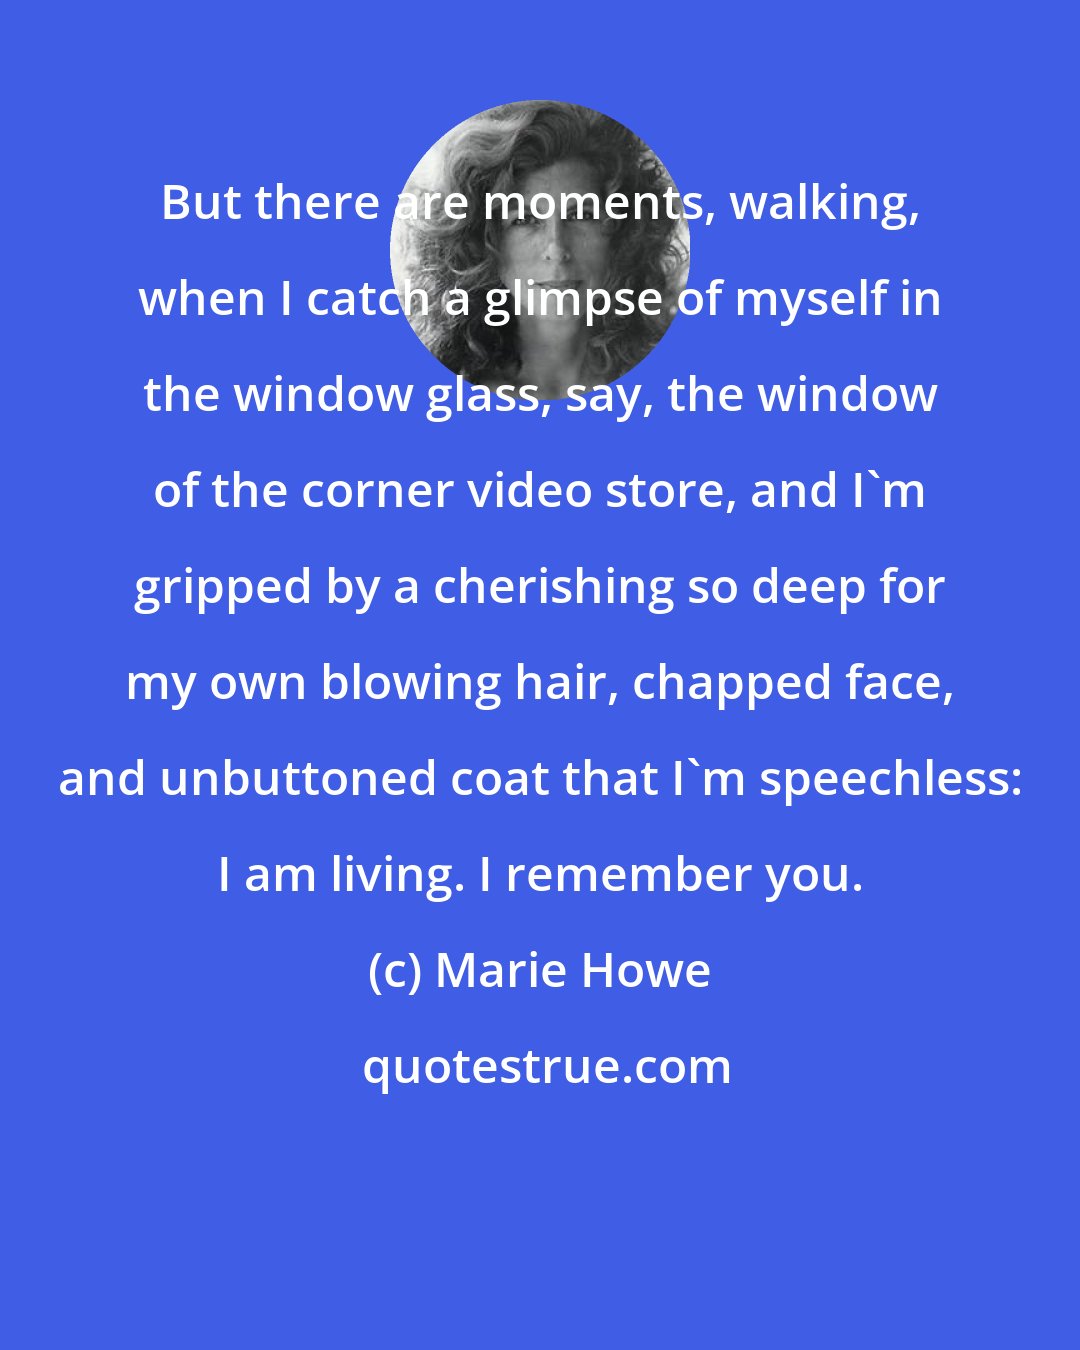 Marie Howe: But there are moments, walking, when I catch a glimpse of myself in the window glass, say, the window of the corner video store, and I'm gripped by a cherishing so deep for my own blowing hair, chapped face, and unbuttoned coat that I'm speechless: I am living. I remember you.